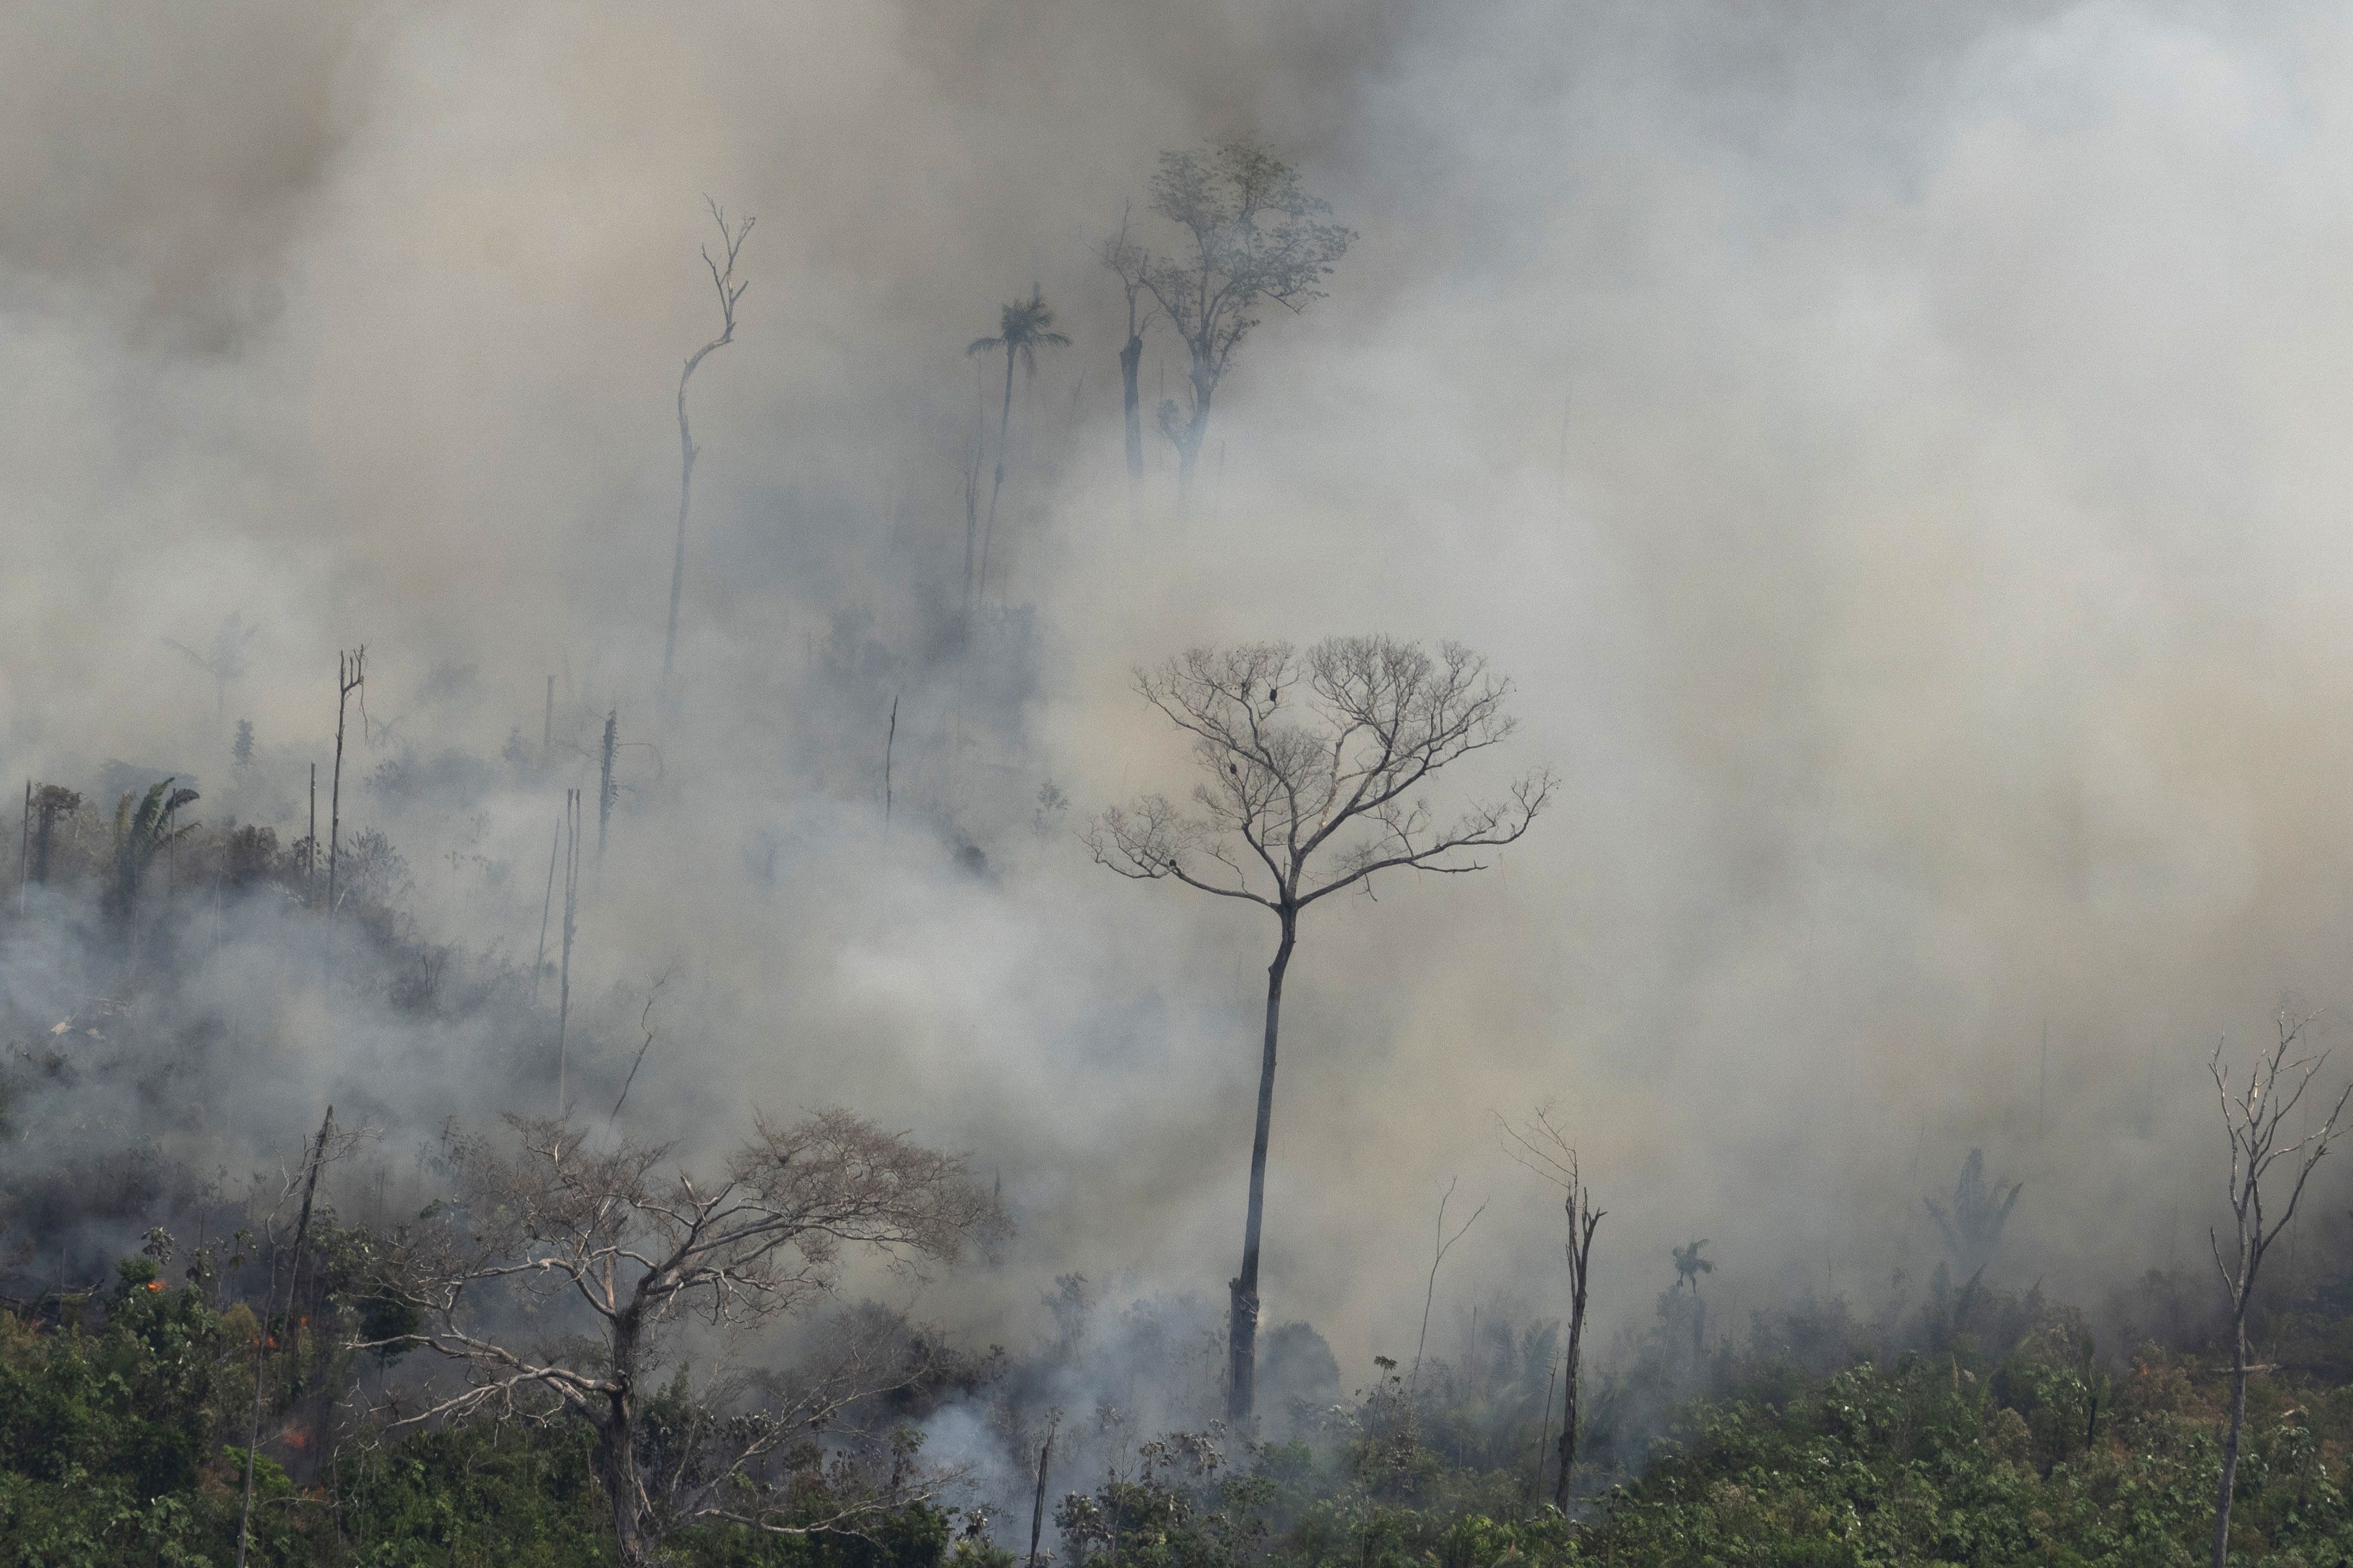 Amazon rainforest fires: Here's what we know | CNN